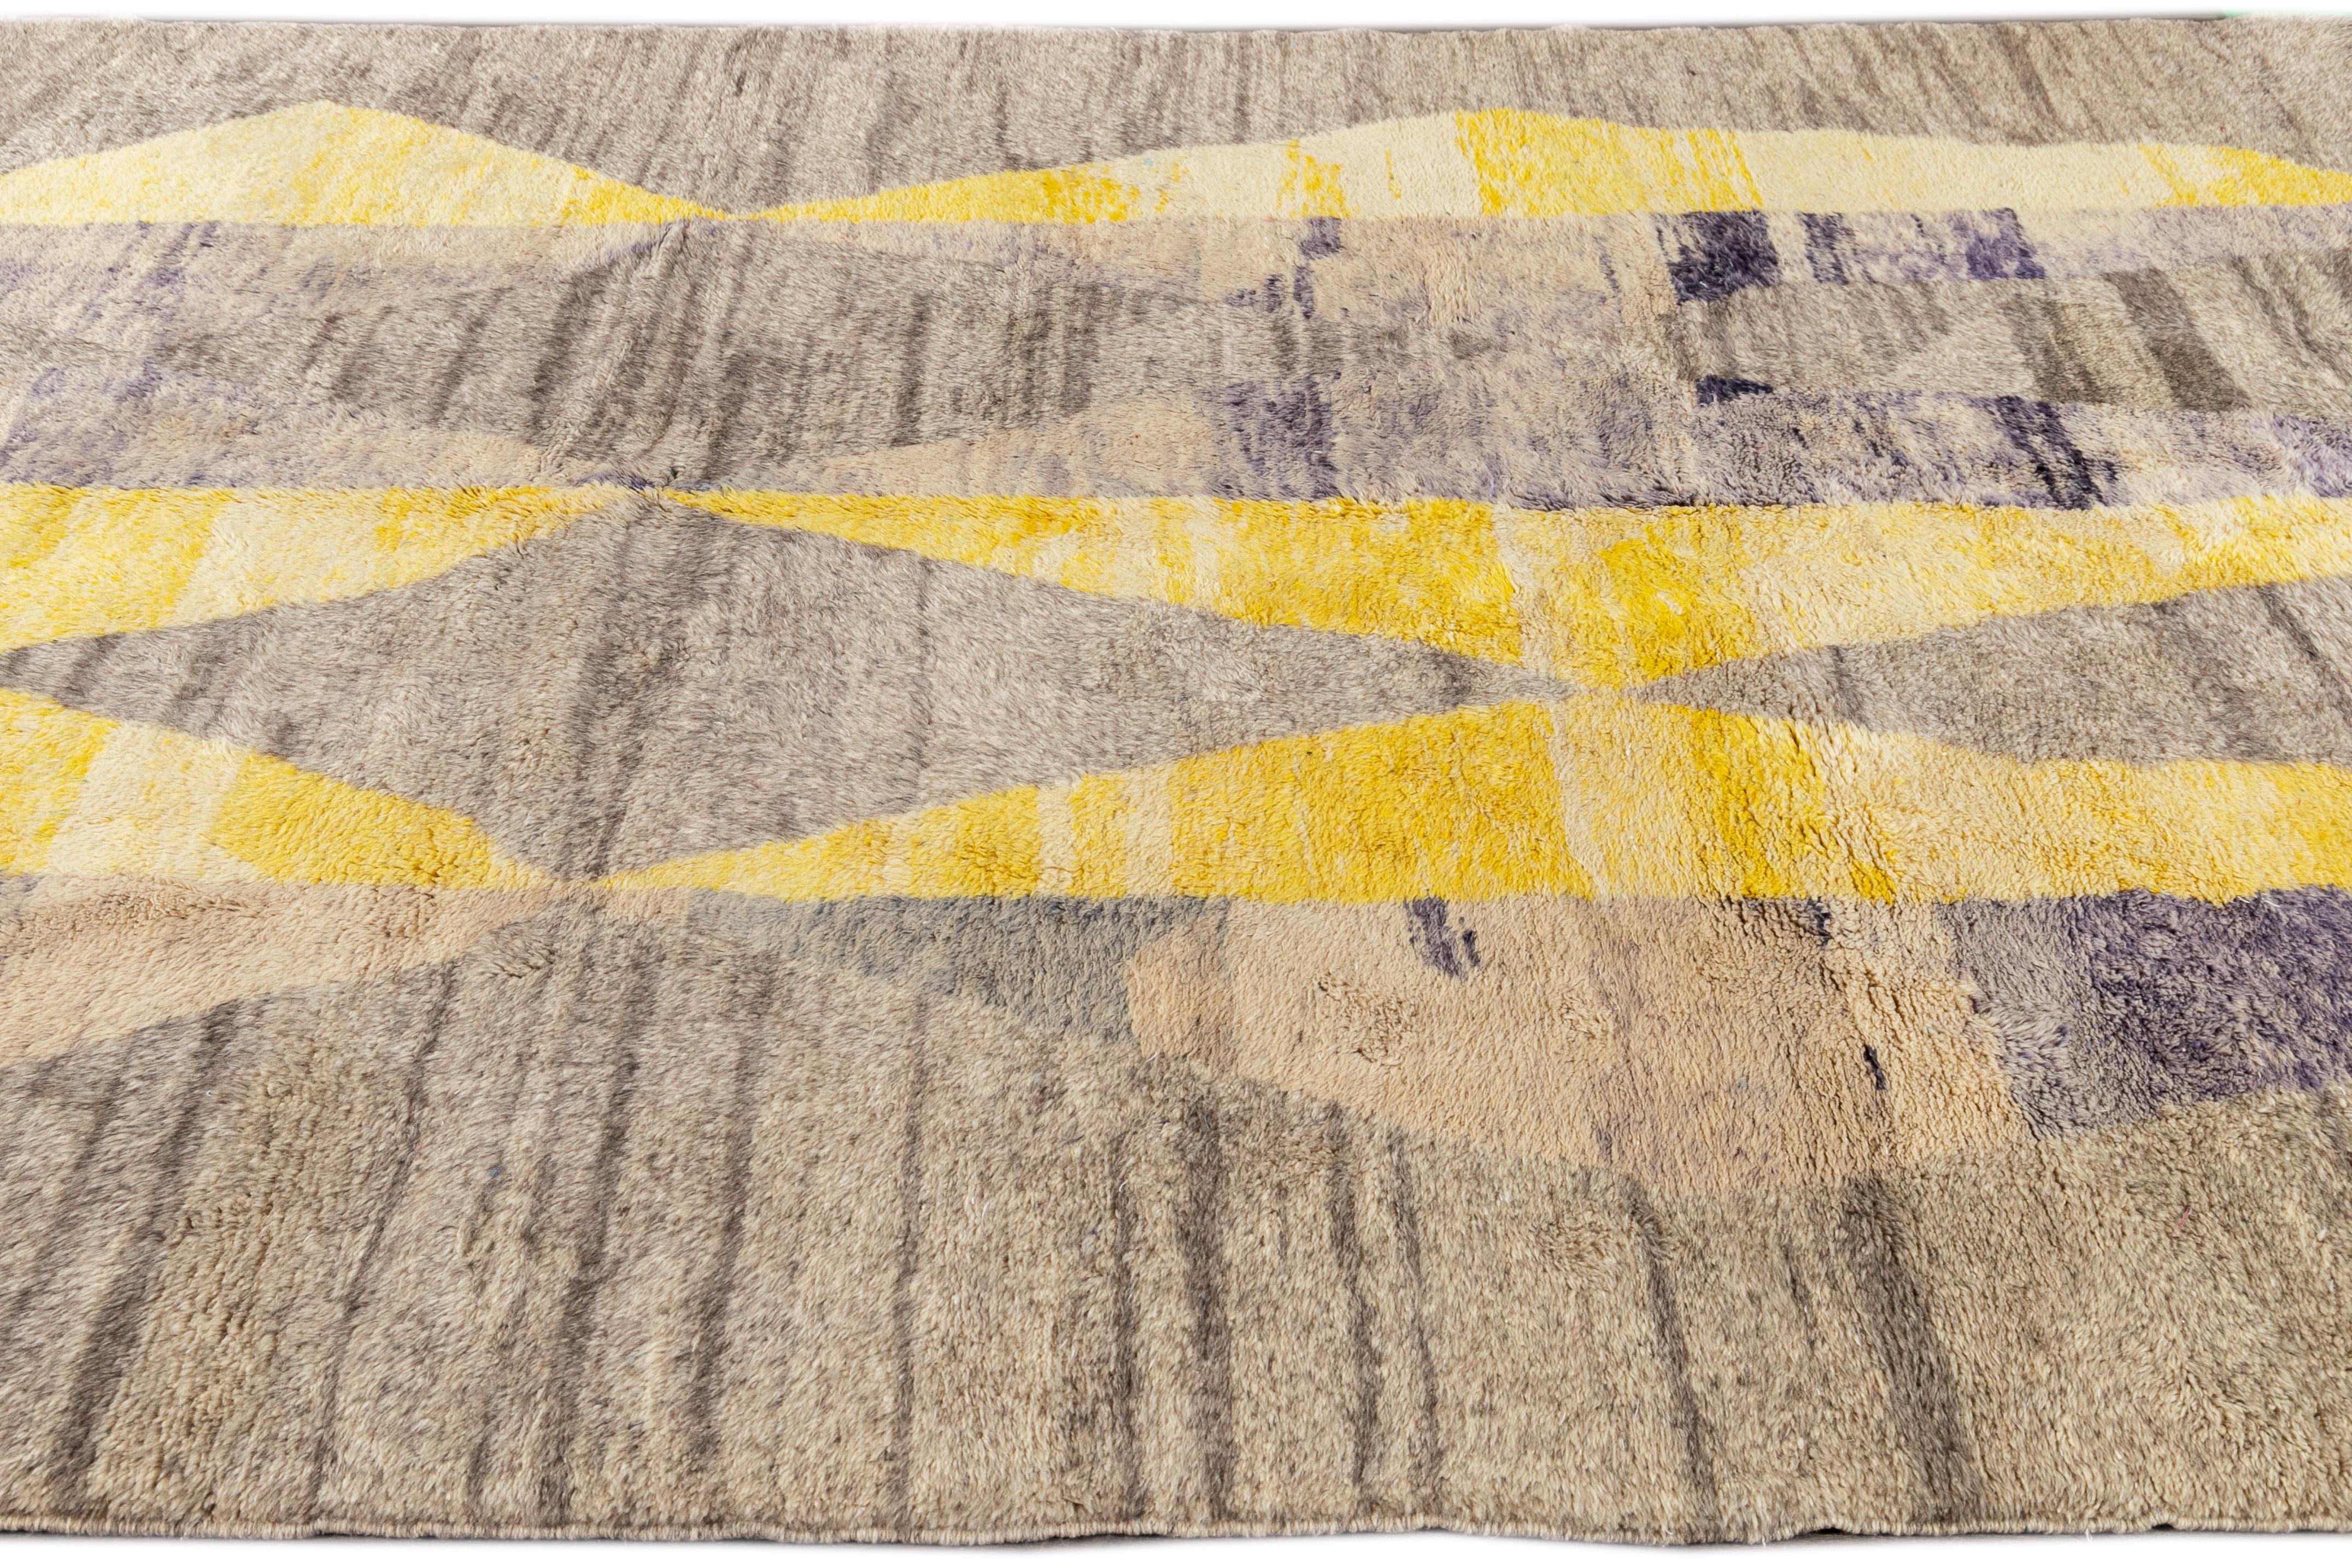 This contemporary Moroccan rug, crafted in the 21st century, boasts a neutral tan/gray field and abstract geometric designs in blue-purple and yellow accents.

This rug measure: 7'9' x 10'7